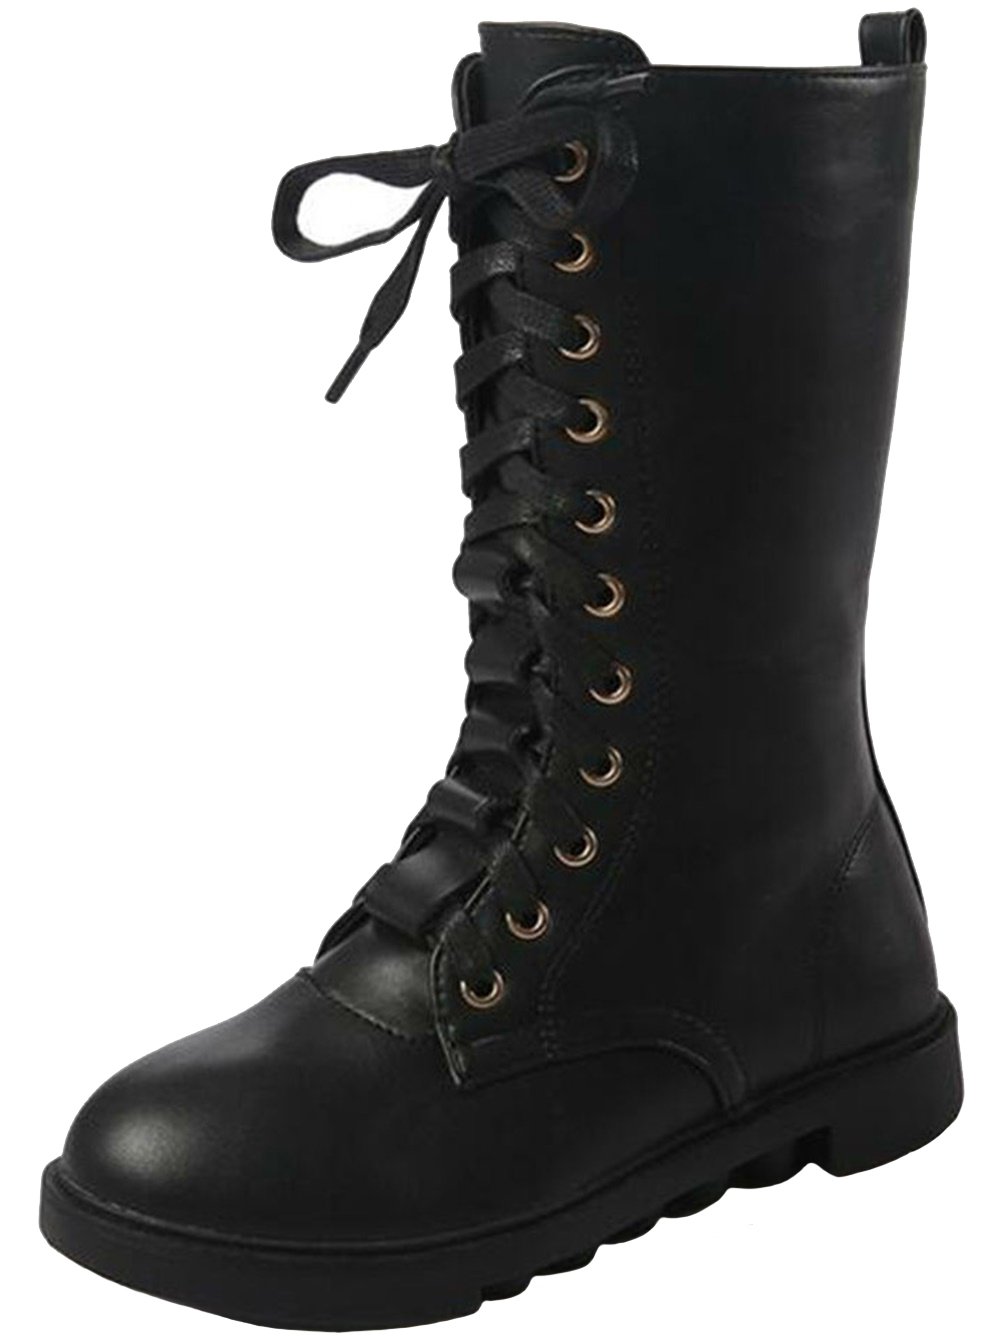 PPXID Kid's Girl's Waterproof Leather Lace-Up Zipper Mid Calf Combat Boots Outdoor Riding Boots